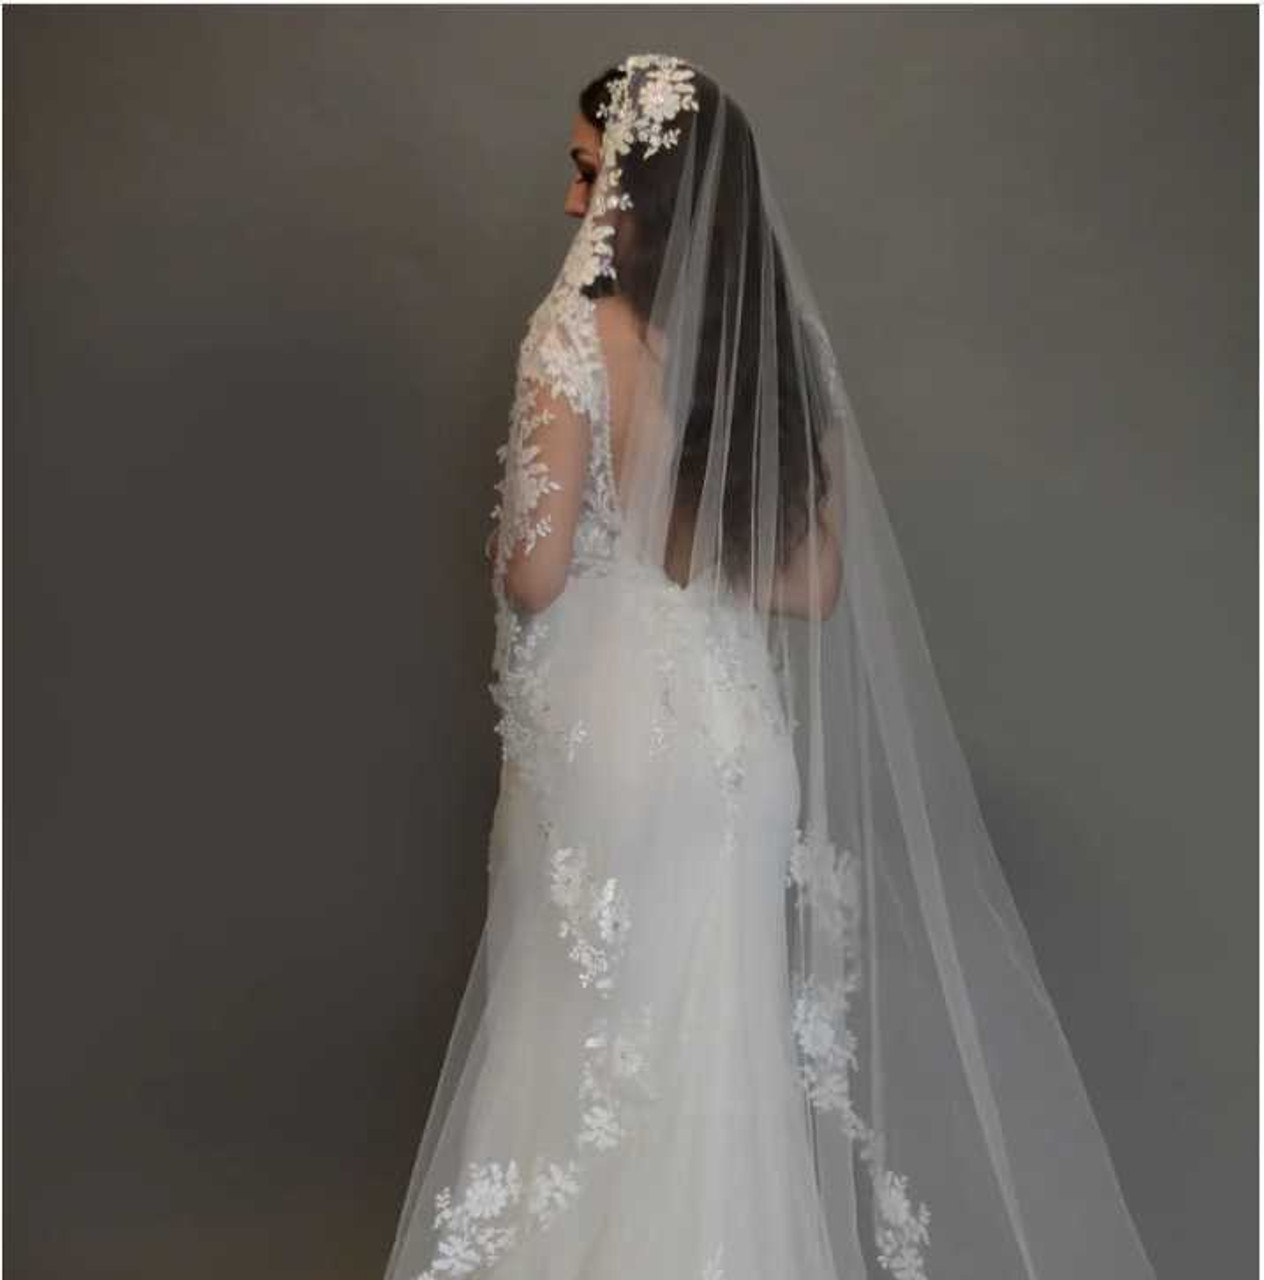 Floral Lace and Crystal Trimmed Elbow Length Veil